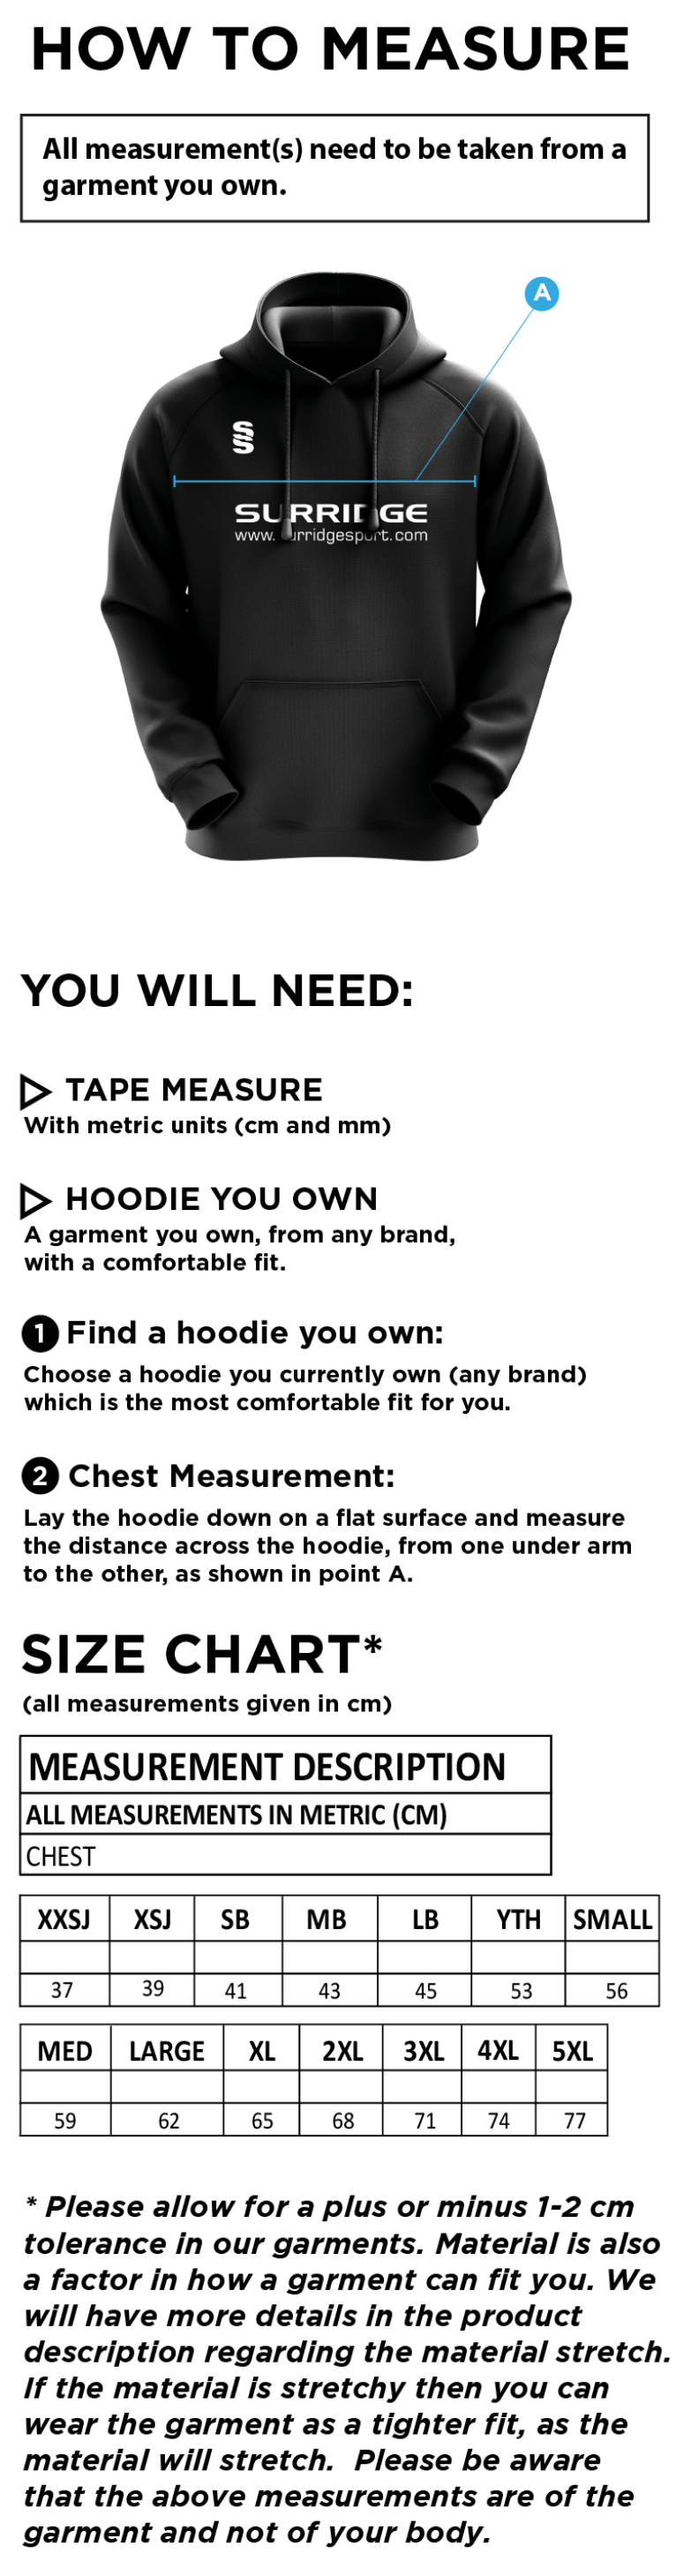 Blade Hoody : Black / White - Size Guide